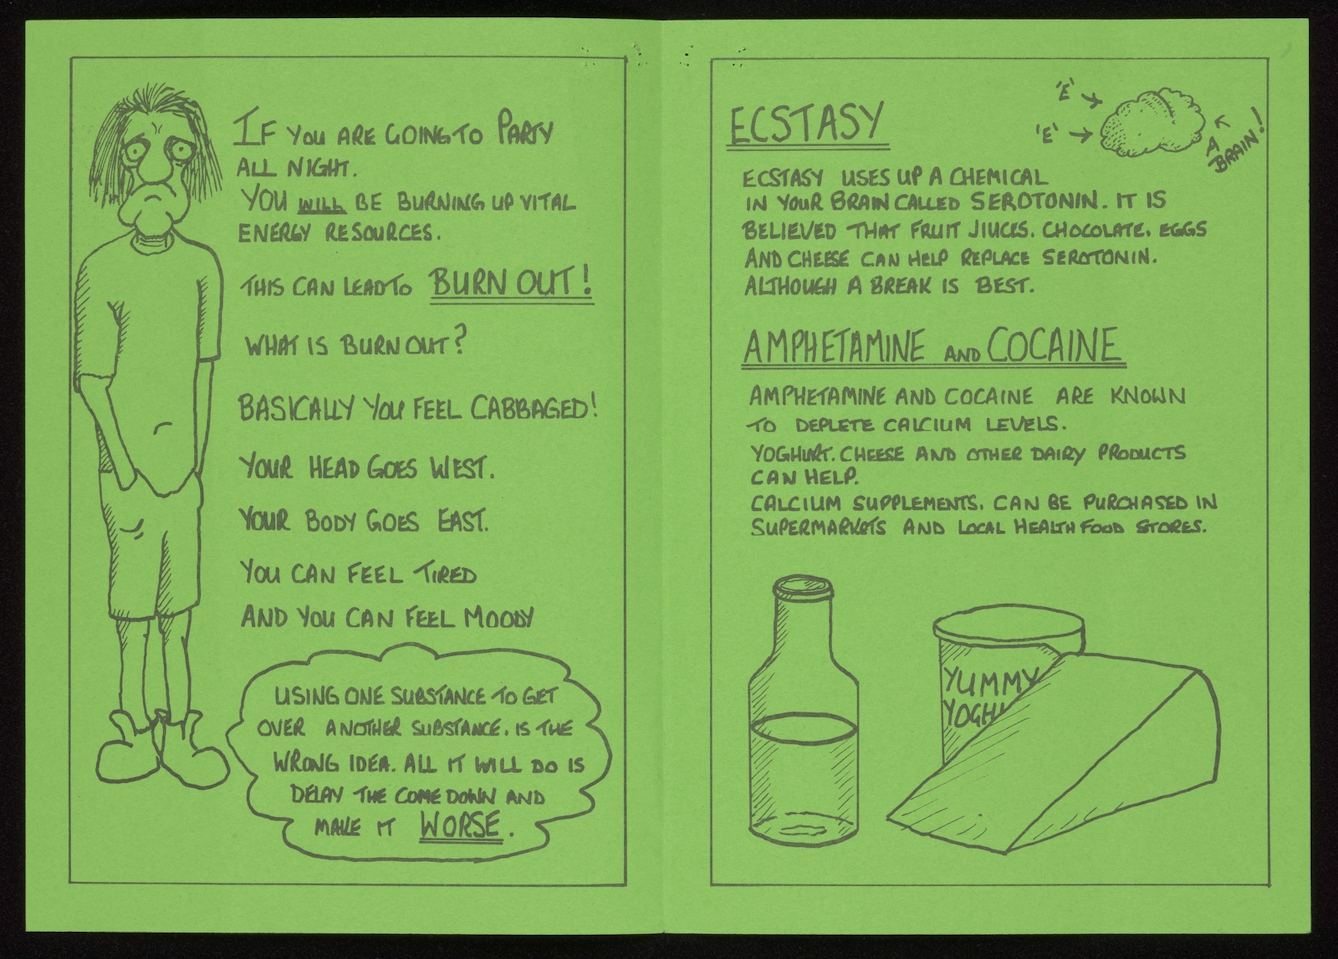 Handmade leaflet with black handwriting and drawing on green paper.